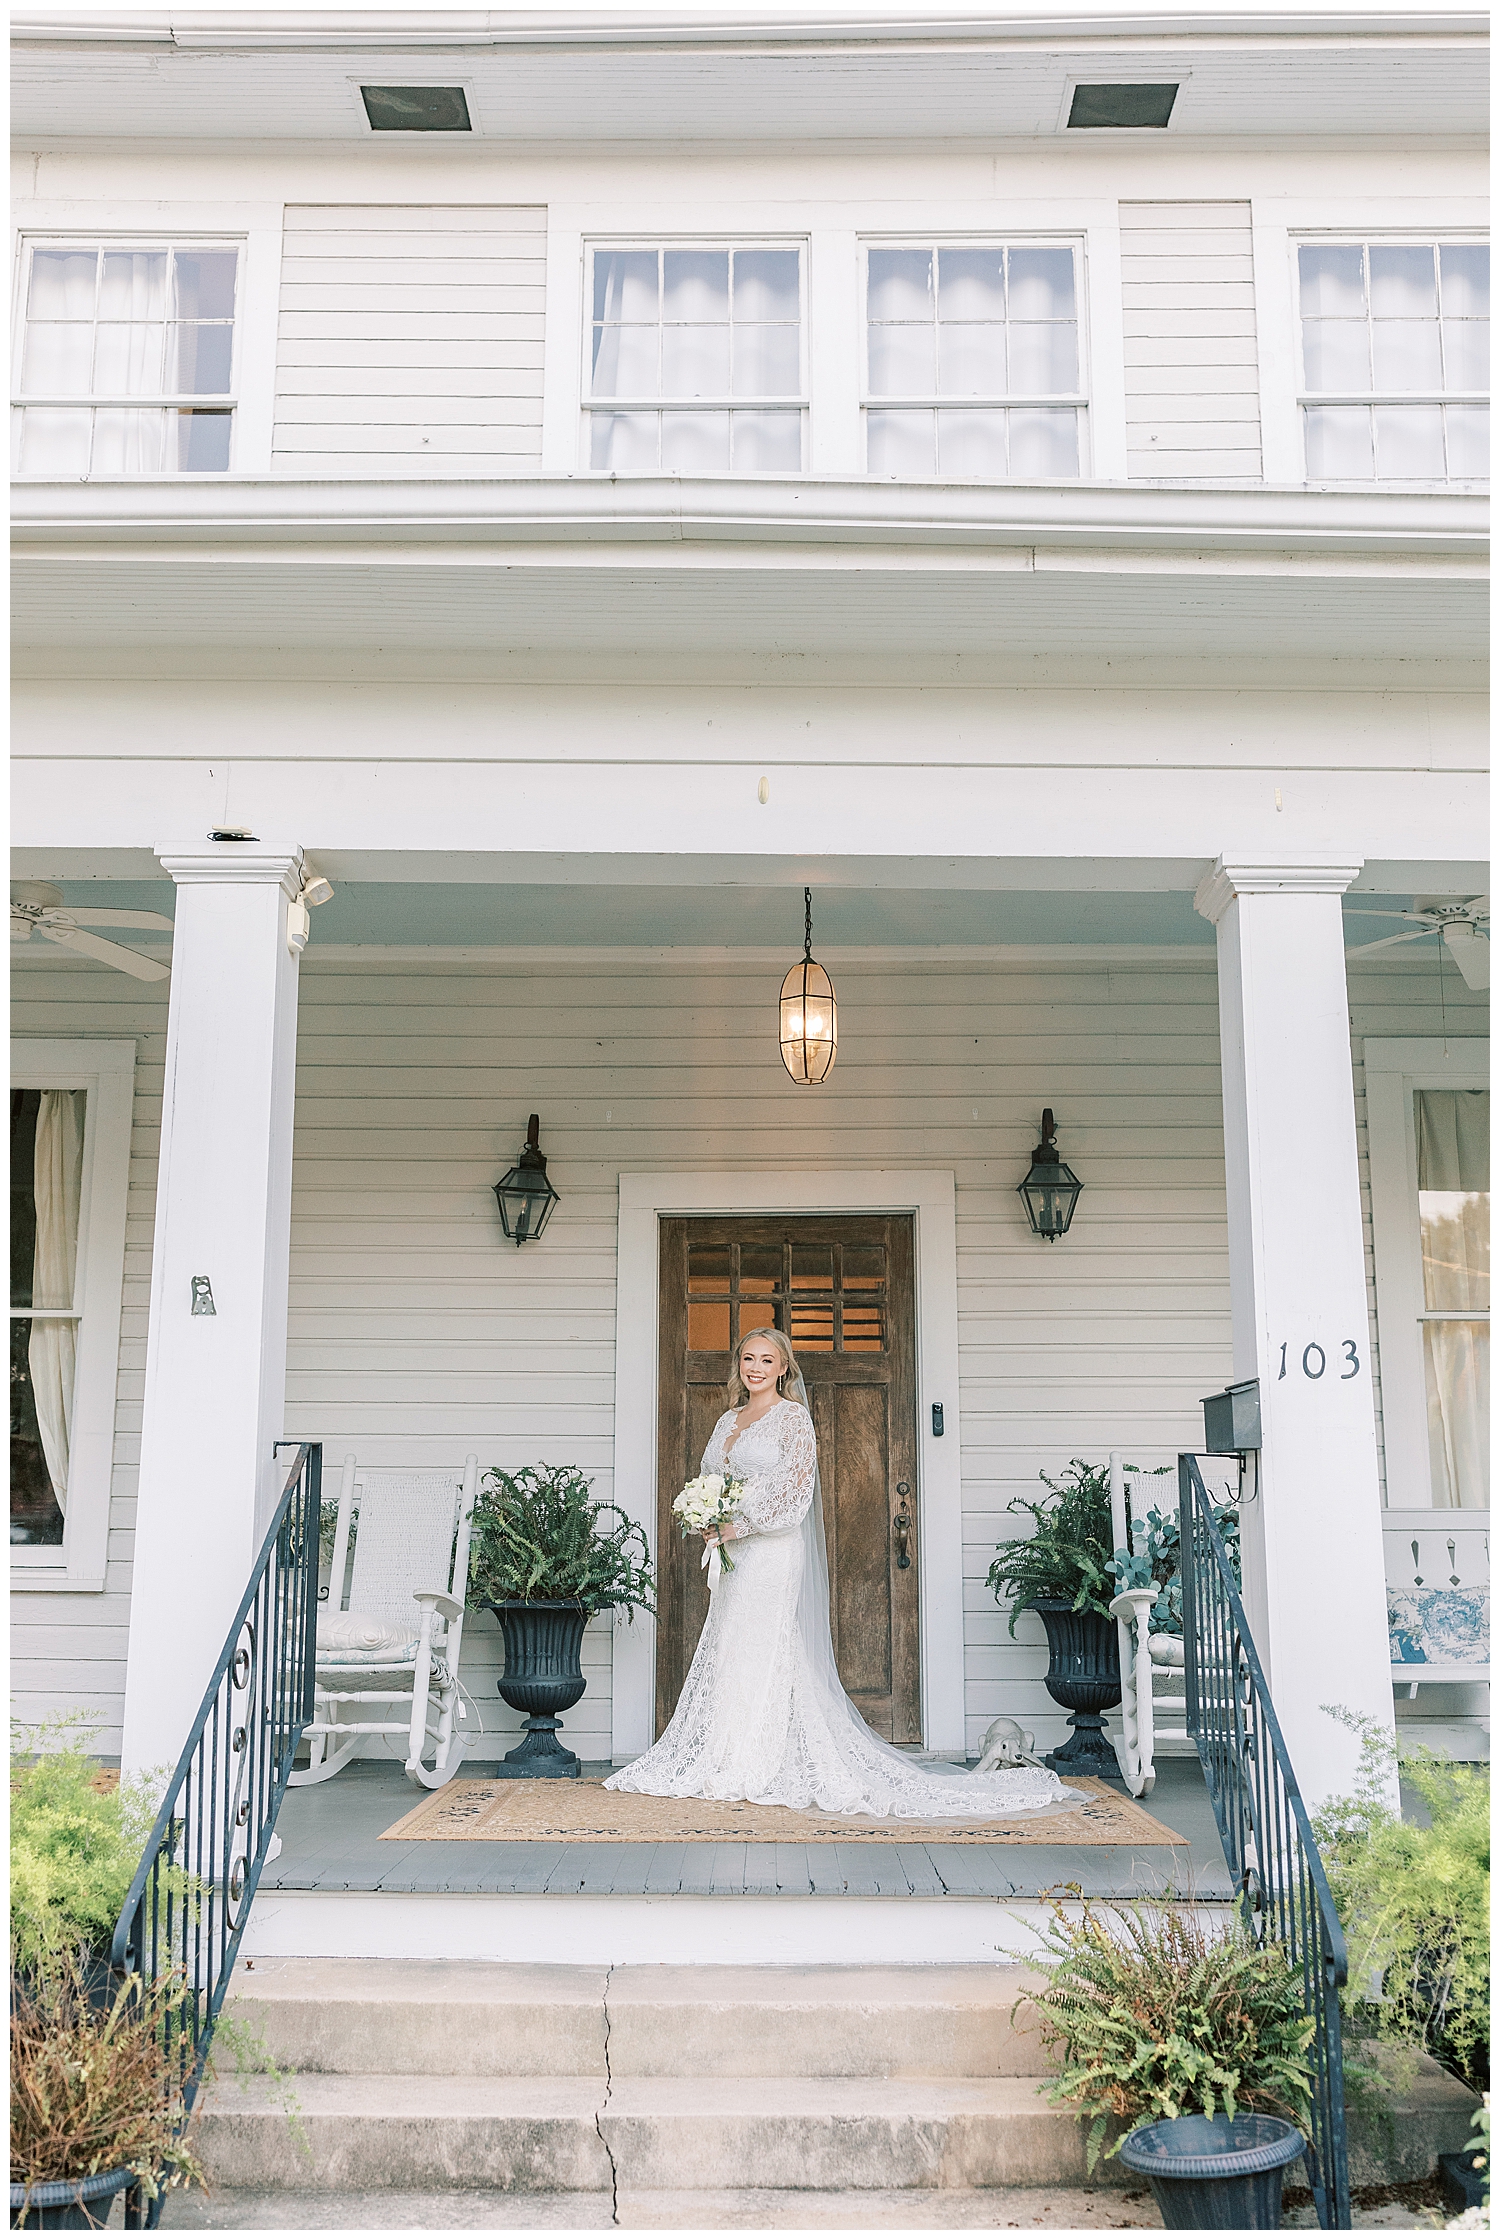 A bride stands on the porch of a historic home in Hattiesburg.